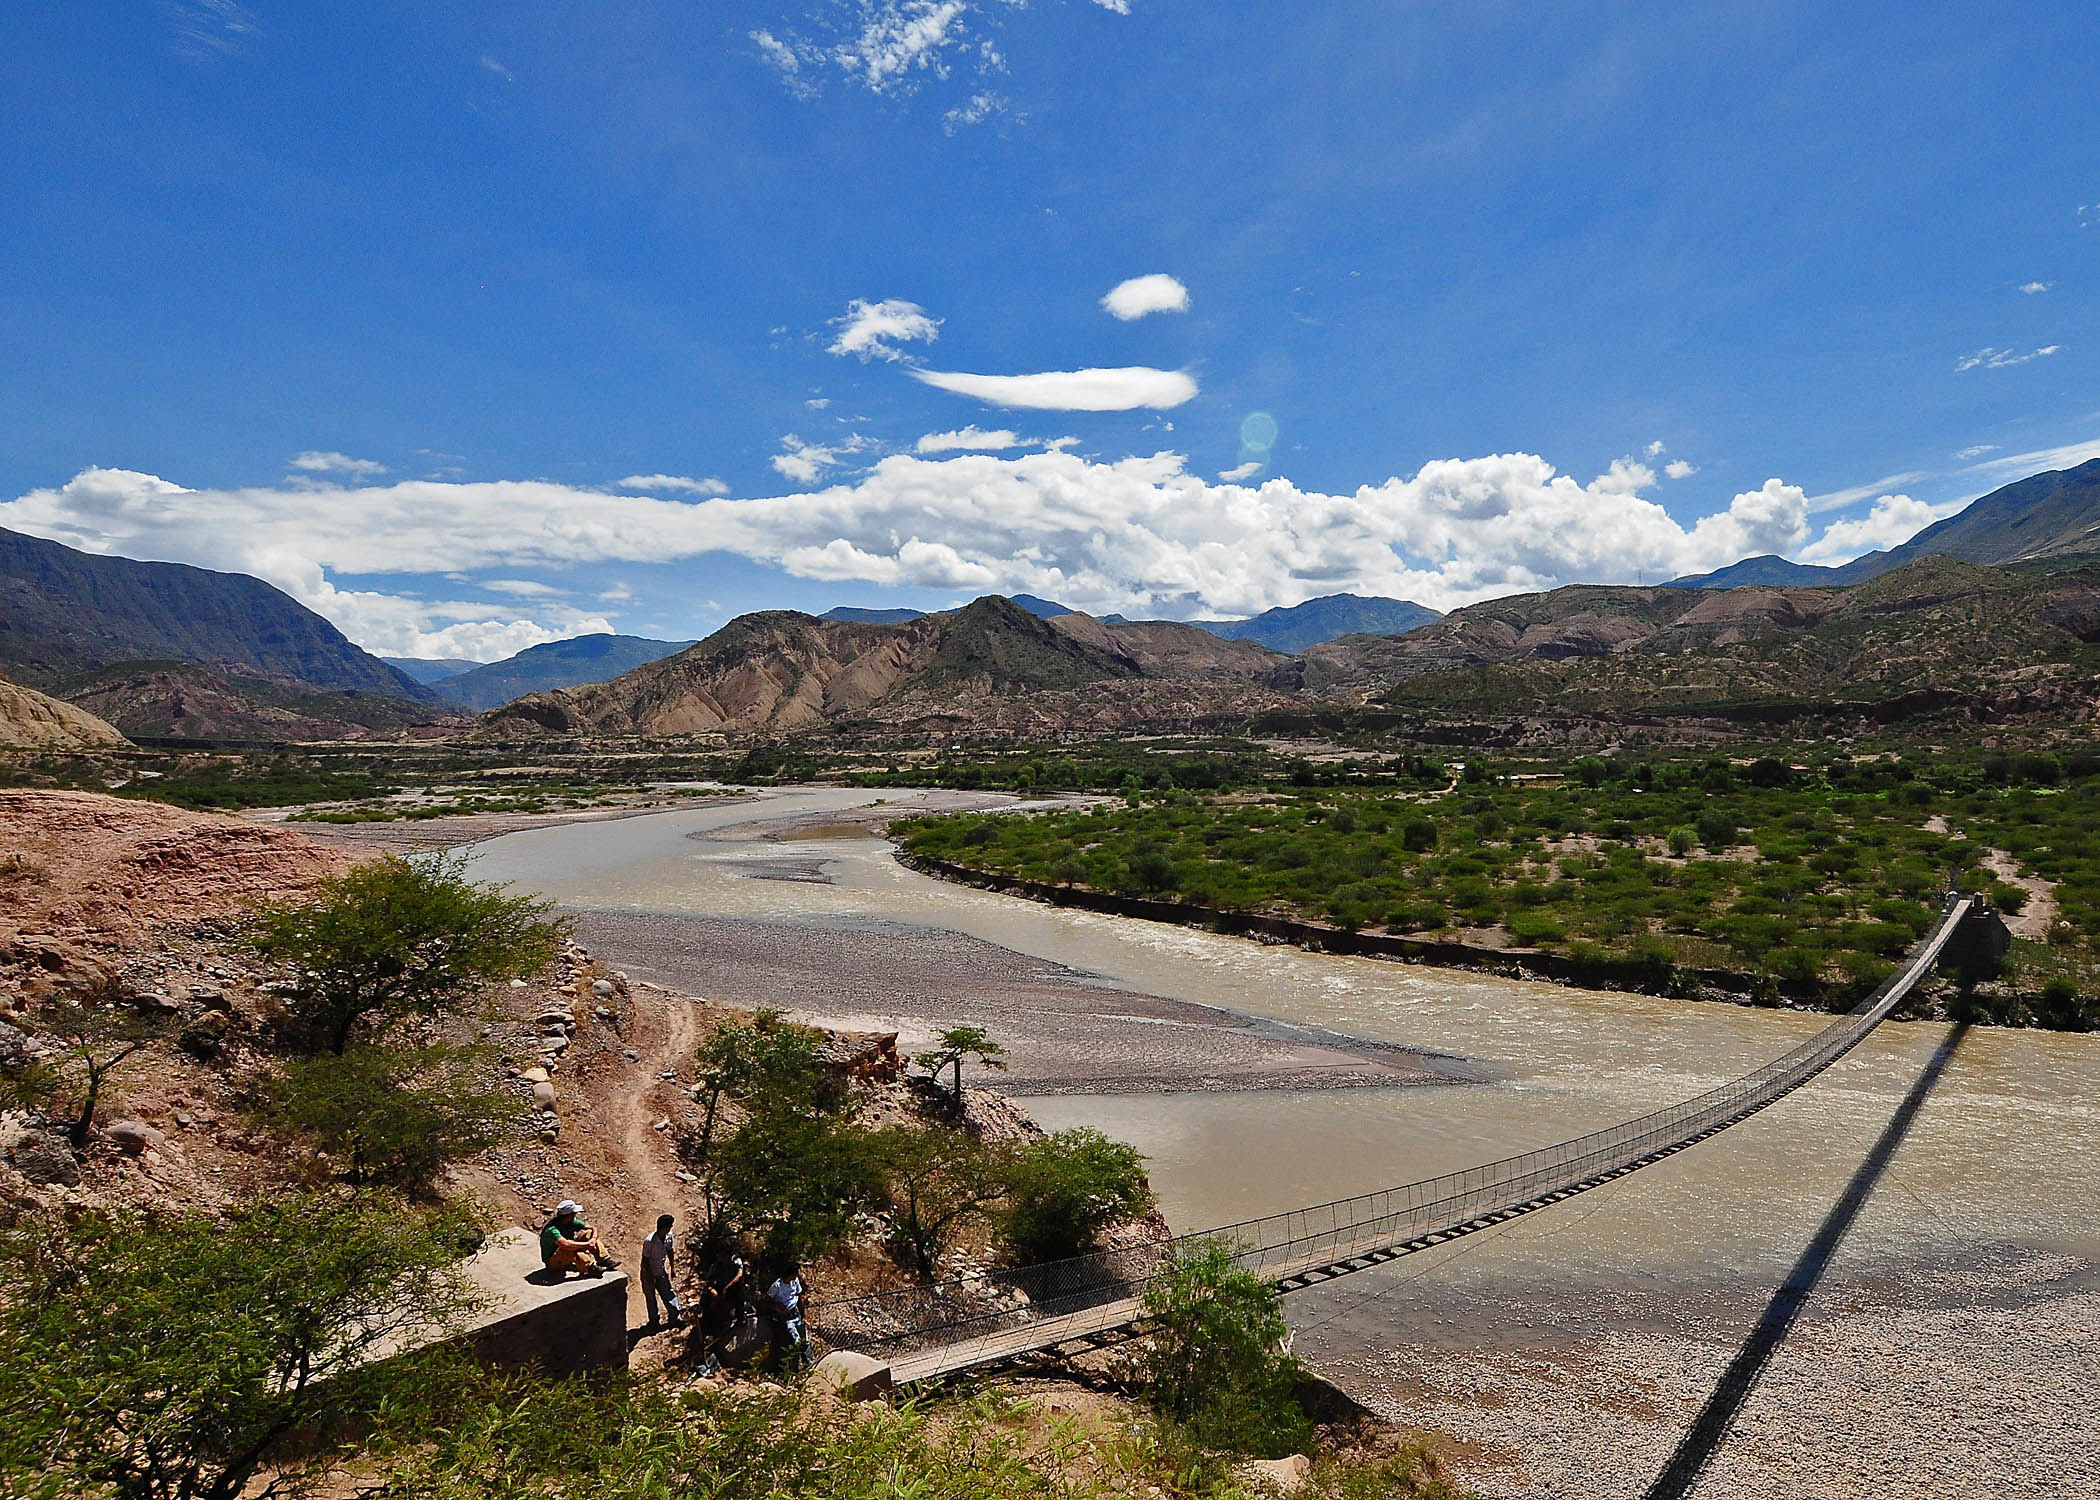 CIFI structured financing of up to US$36M for small hydropower plants in Peru